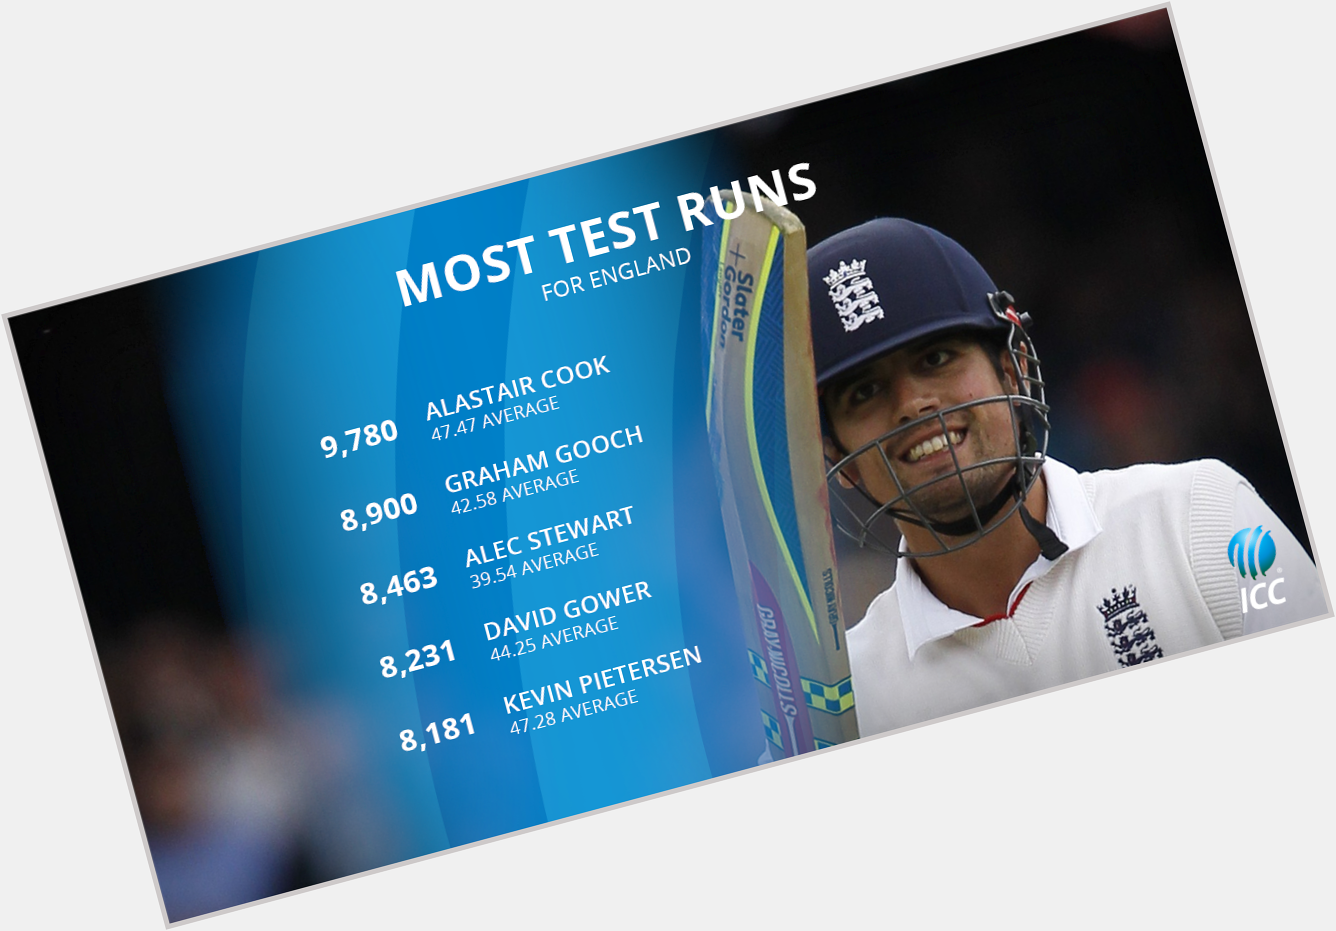 Happy Birthday to England\s all-time leading runs scorer in Tests And Great Captain In Test Alastair Cook! 